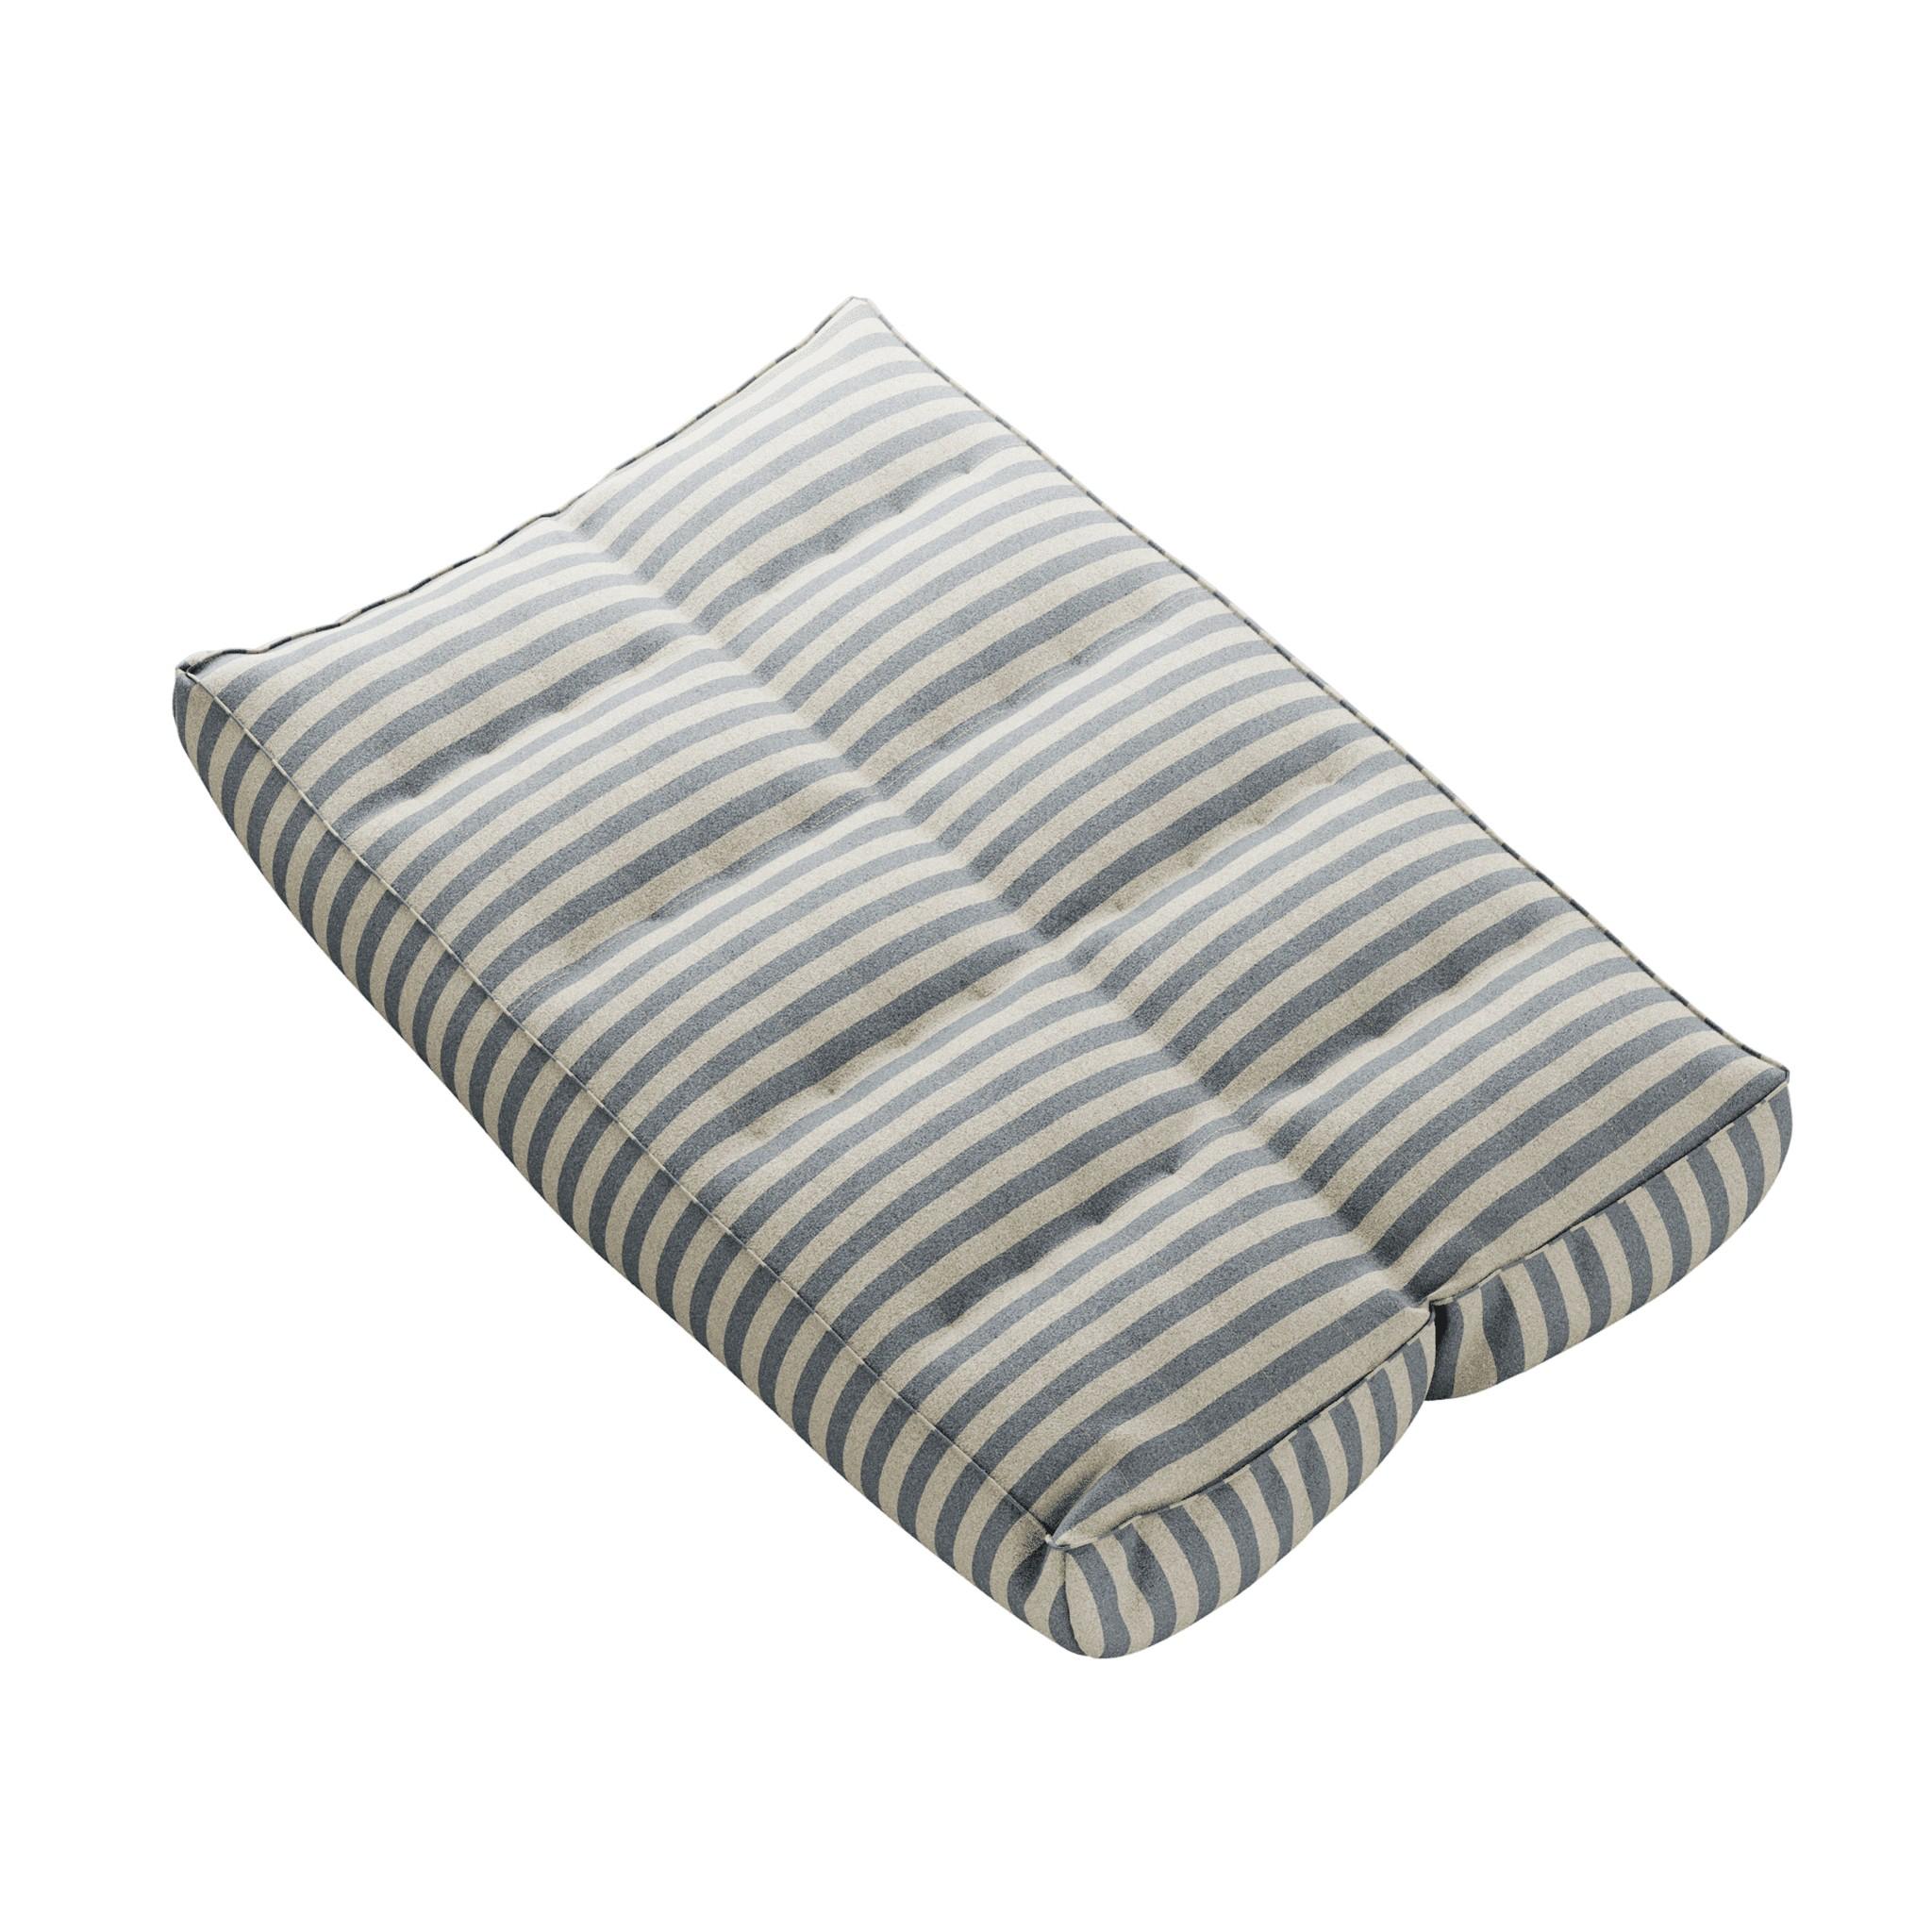 Modern Outdoor Sofa Folding Daybed Upholstered in Outdoor Blue Striped Fabric For Sale 1